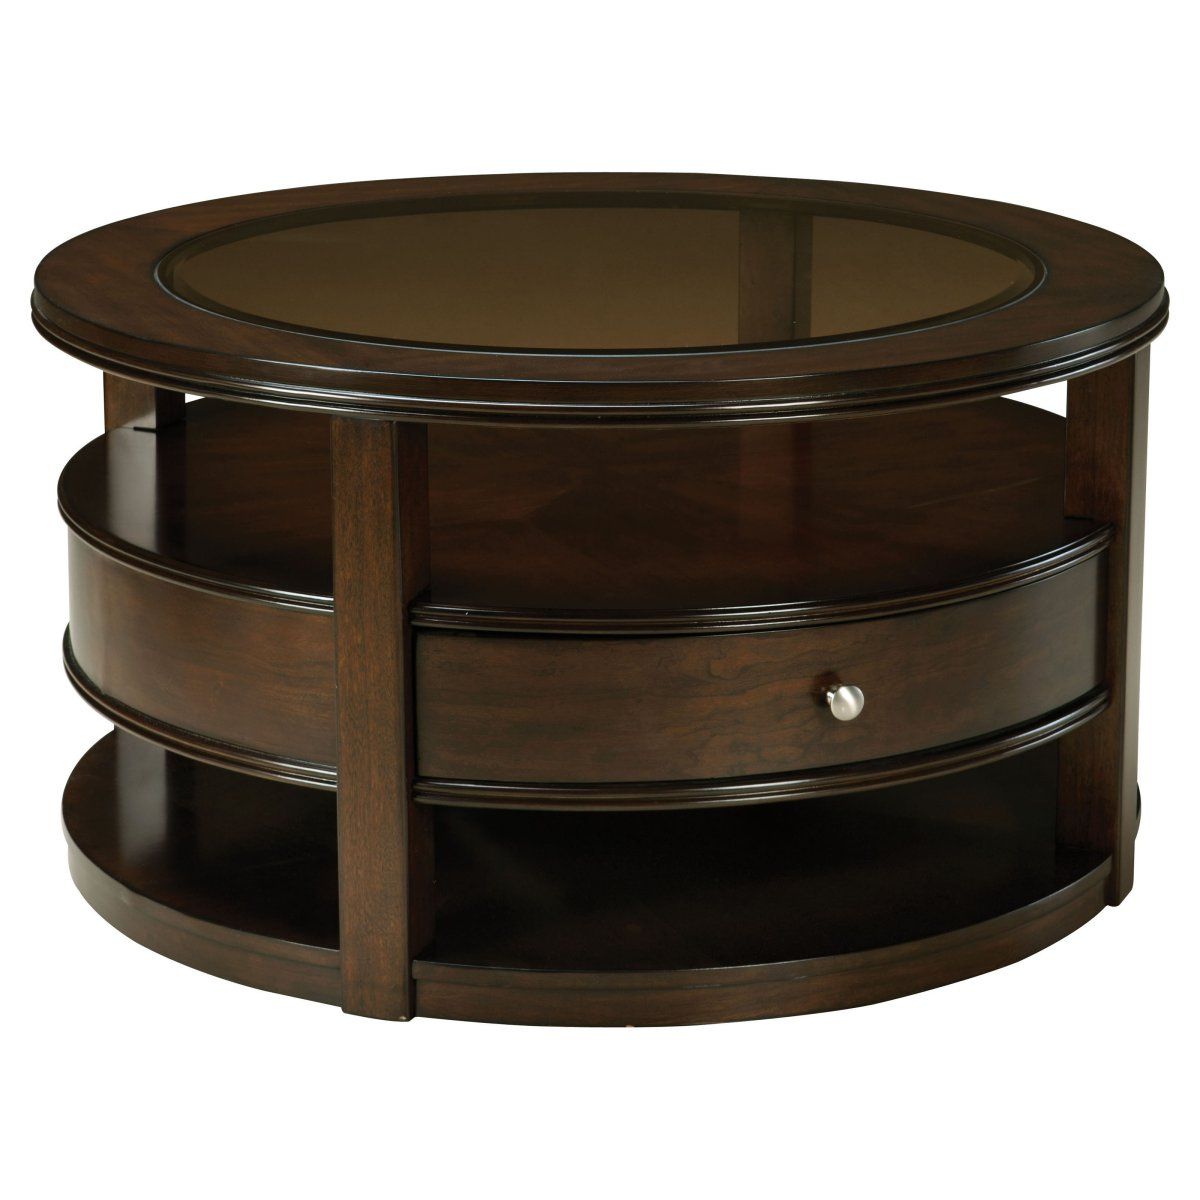 Awesome Round Coffee Tables With Storage – Homesfeed Regarding Round Coffee Tables With Storage (Gallery 3 of 20)